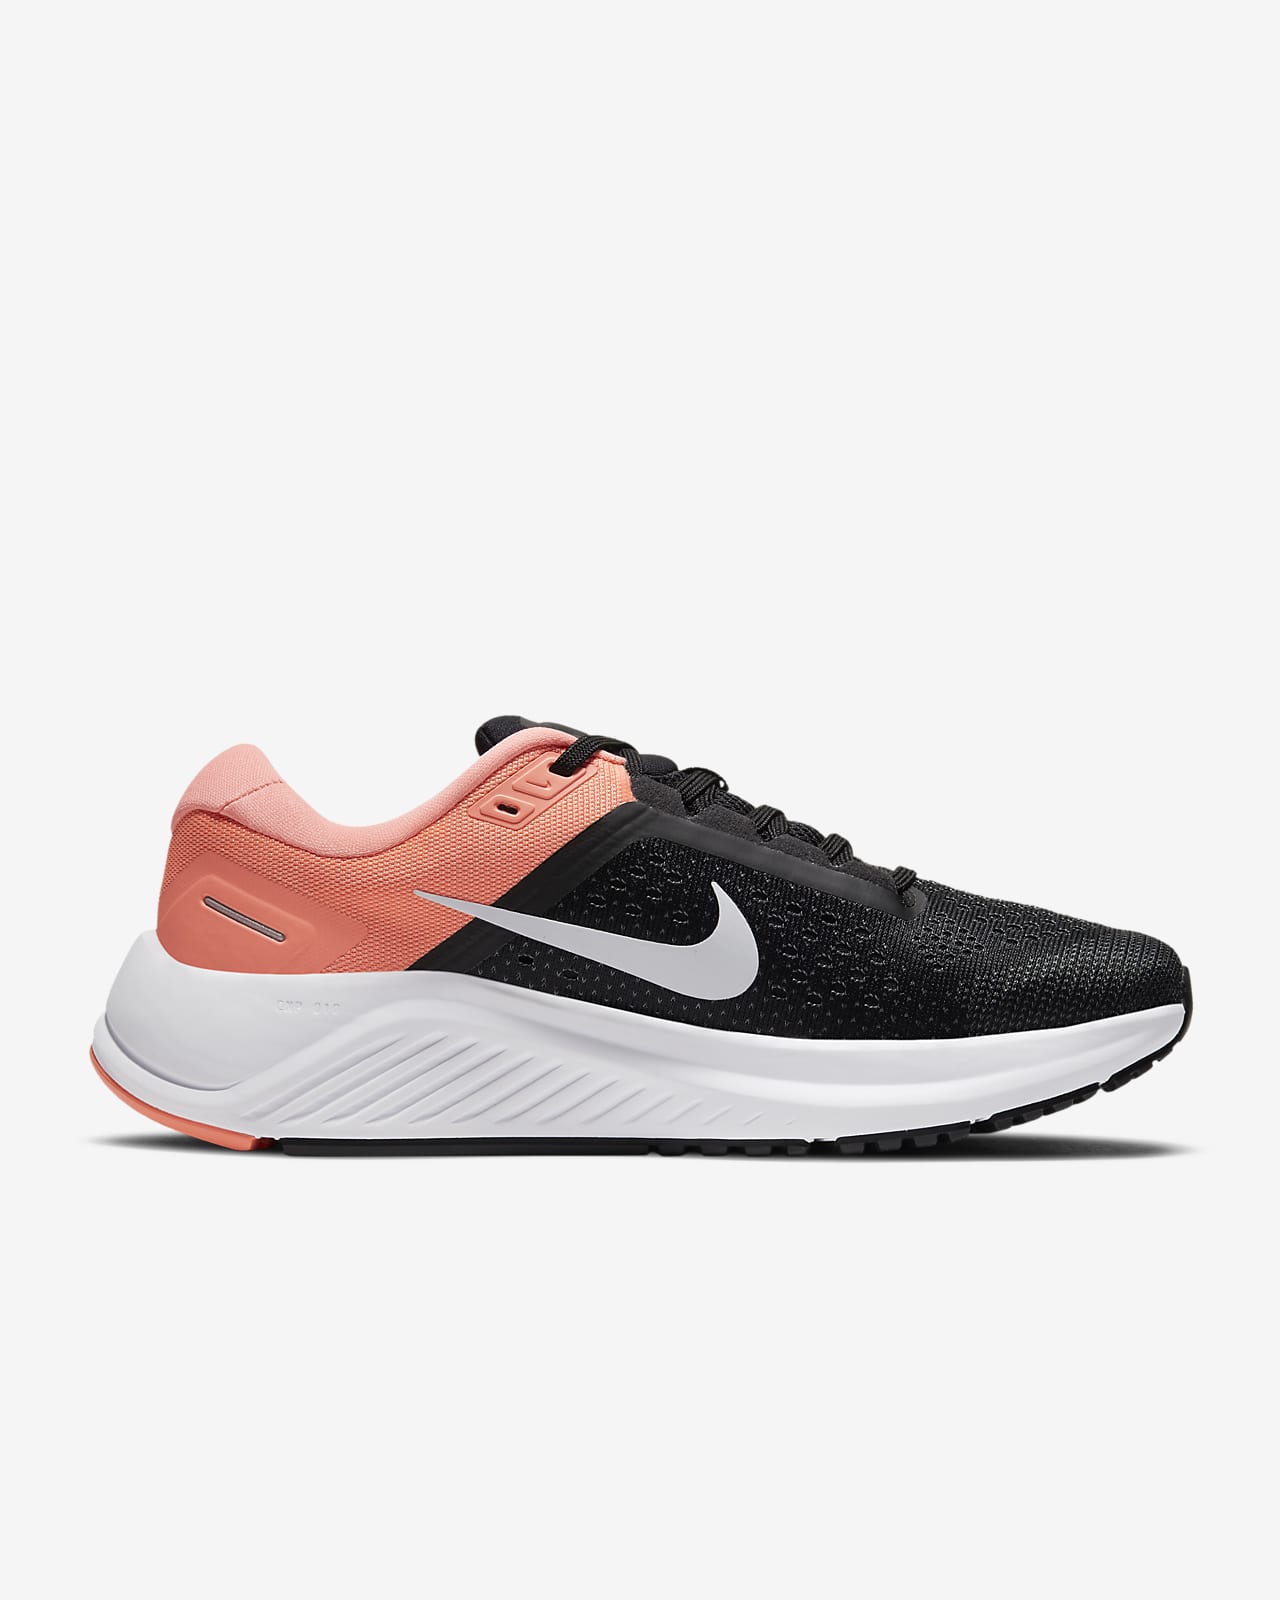 nike zoom structure 14 women's